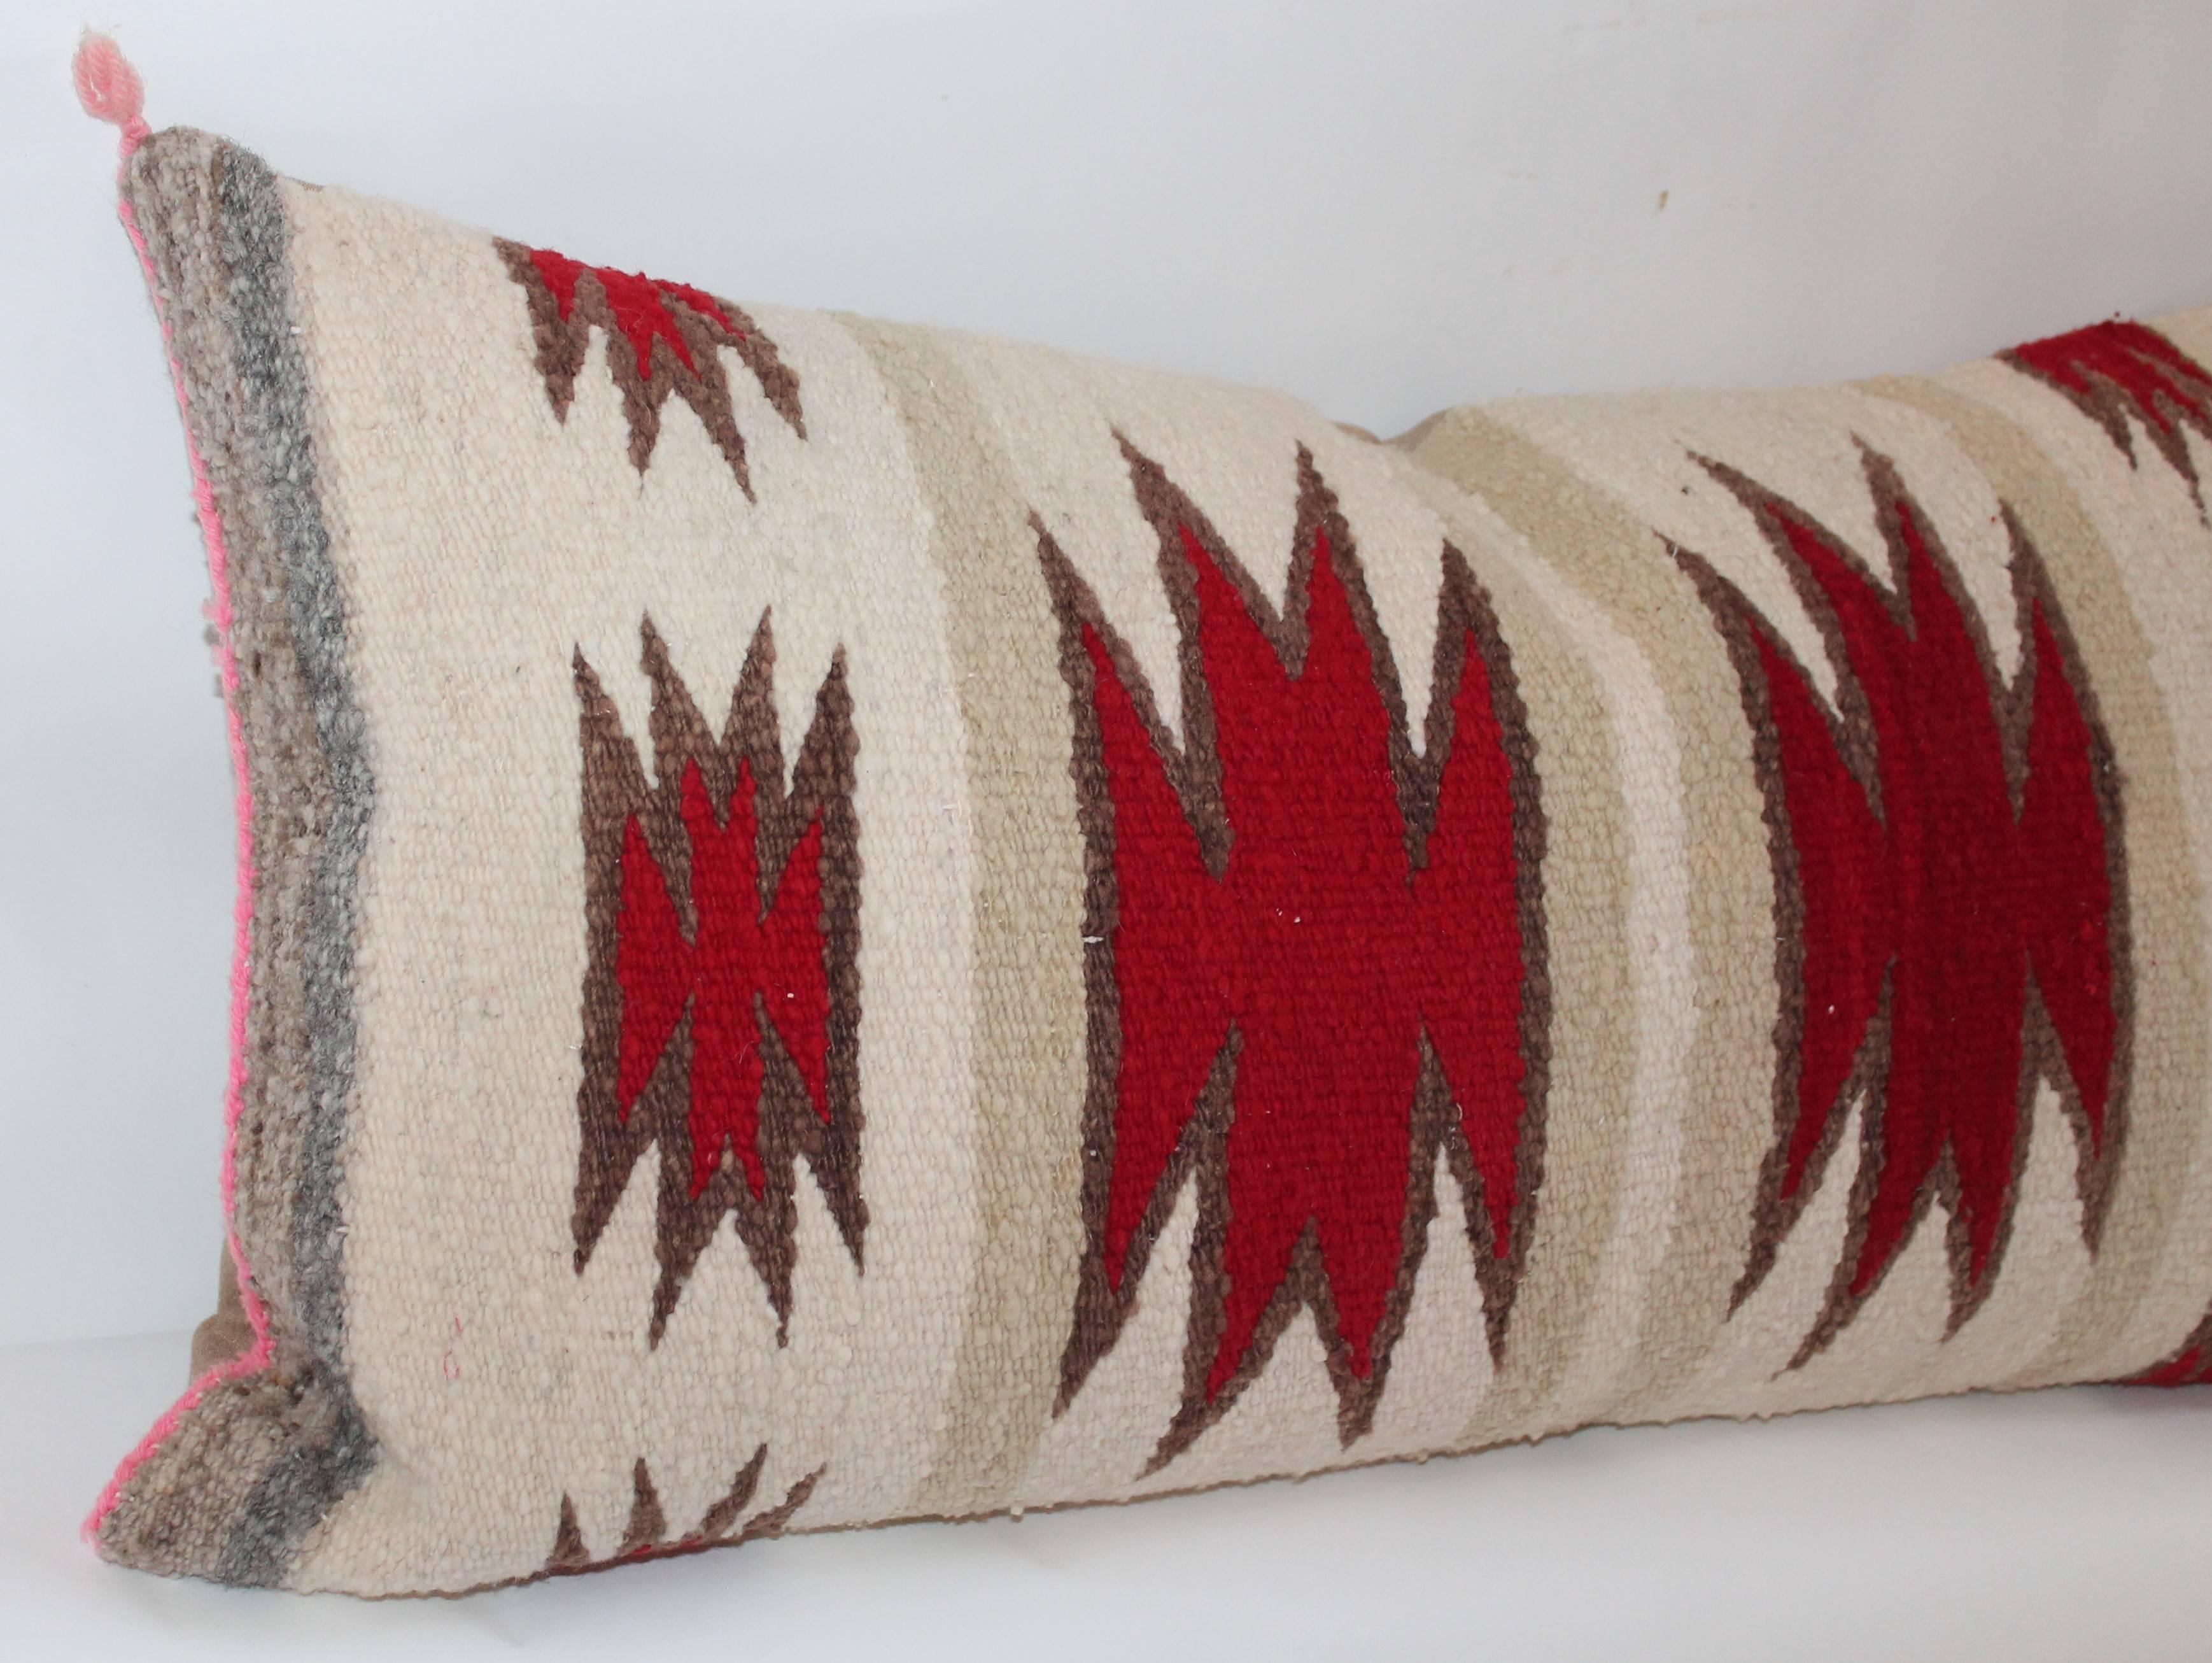 This early and graphic Navajo saddle blanket weaving pillow is in good condition and has a slight fade throughout. The backing is in a tan cotton linen. The insert is down and feather fill.